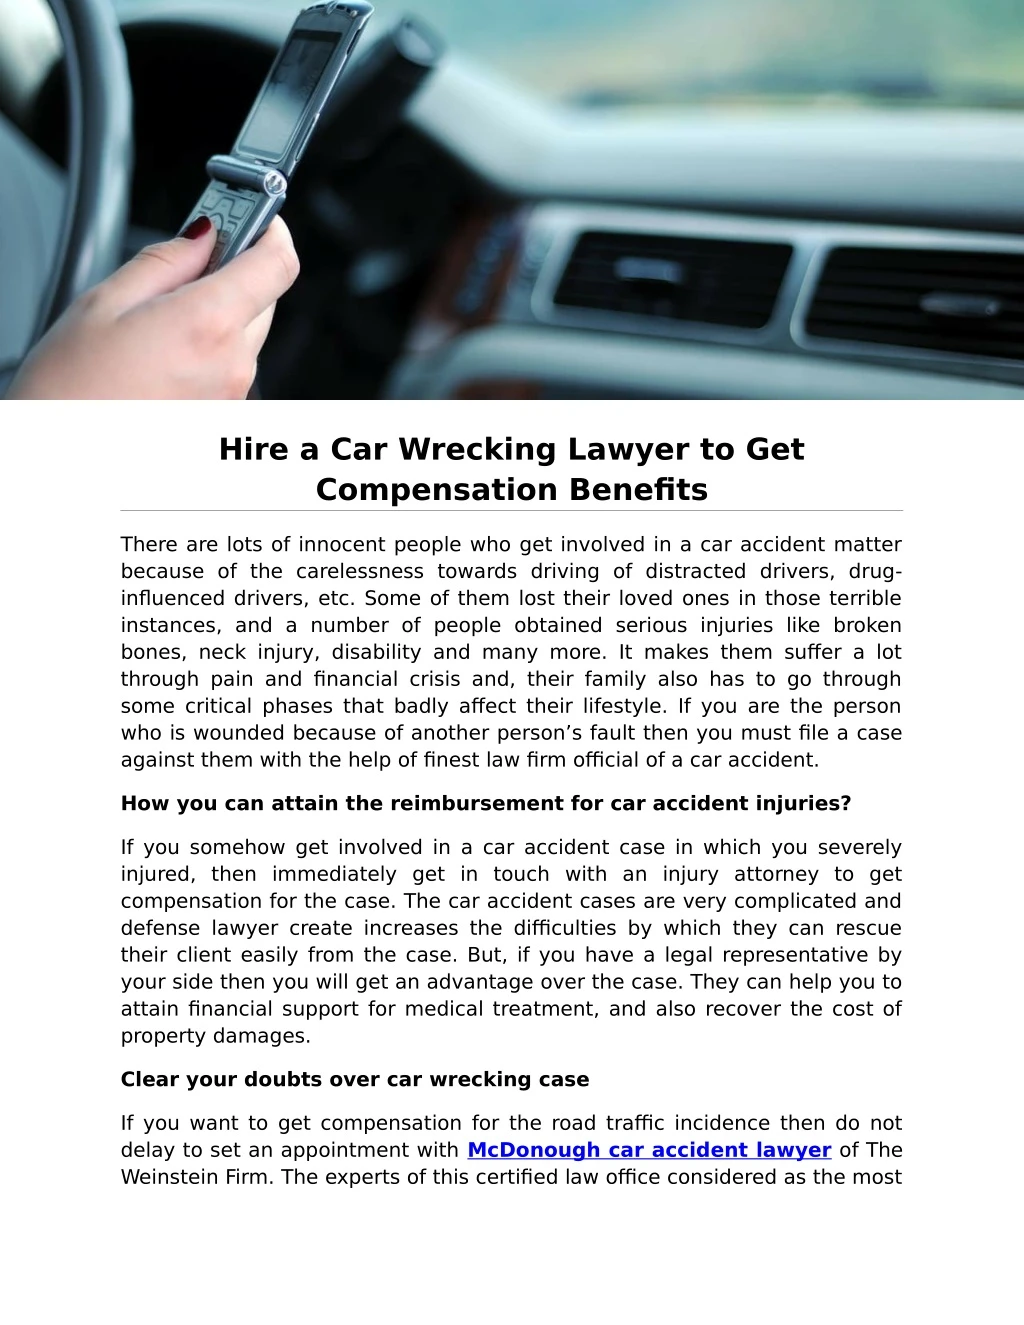 hire a car wrecking lawyer to get compensation